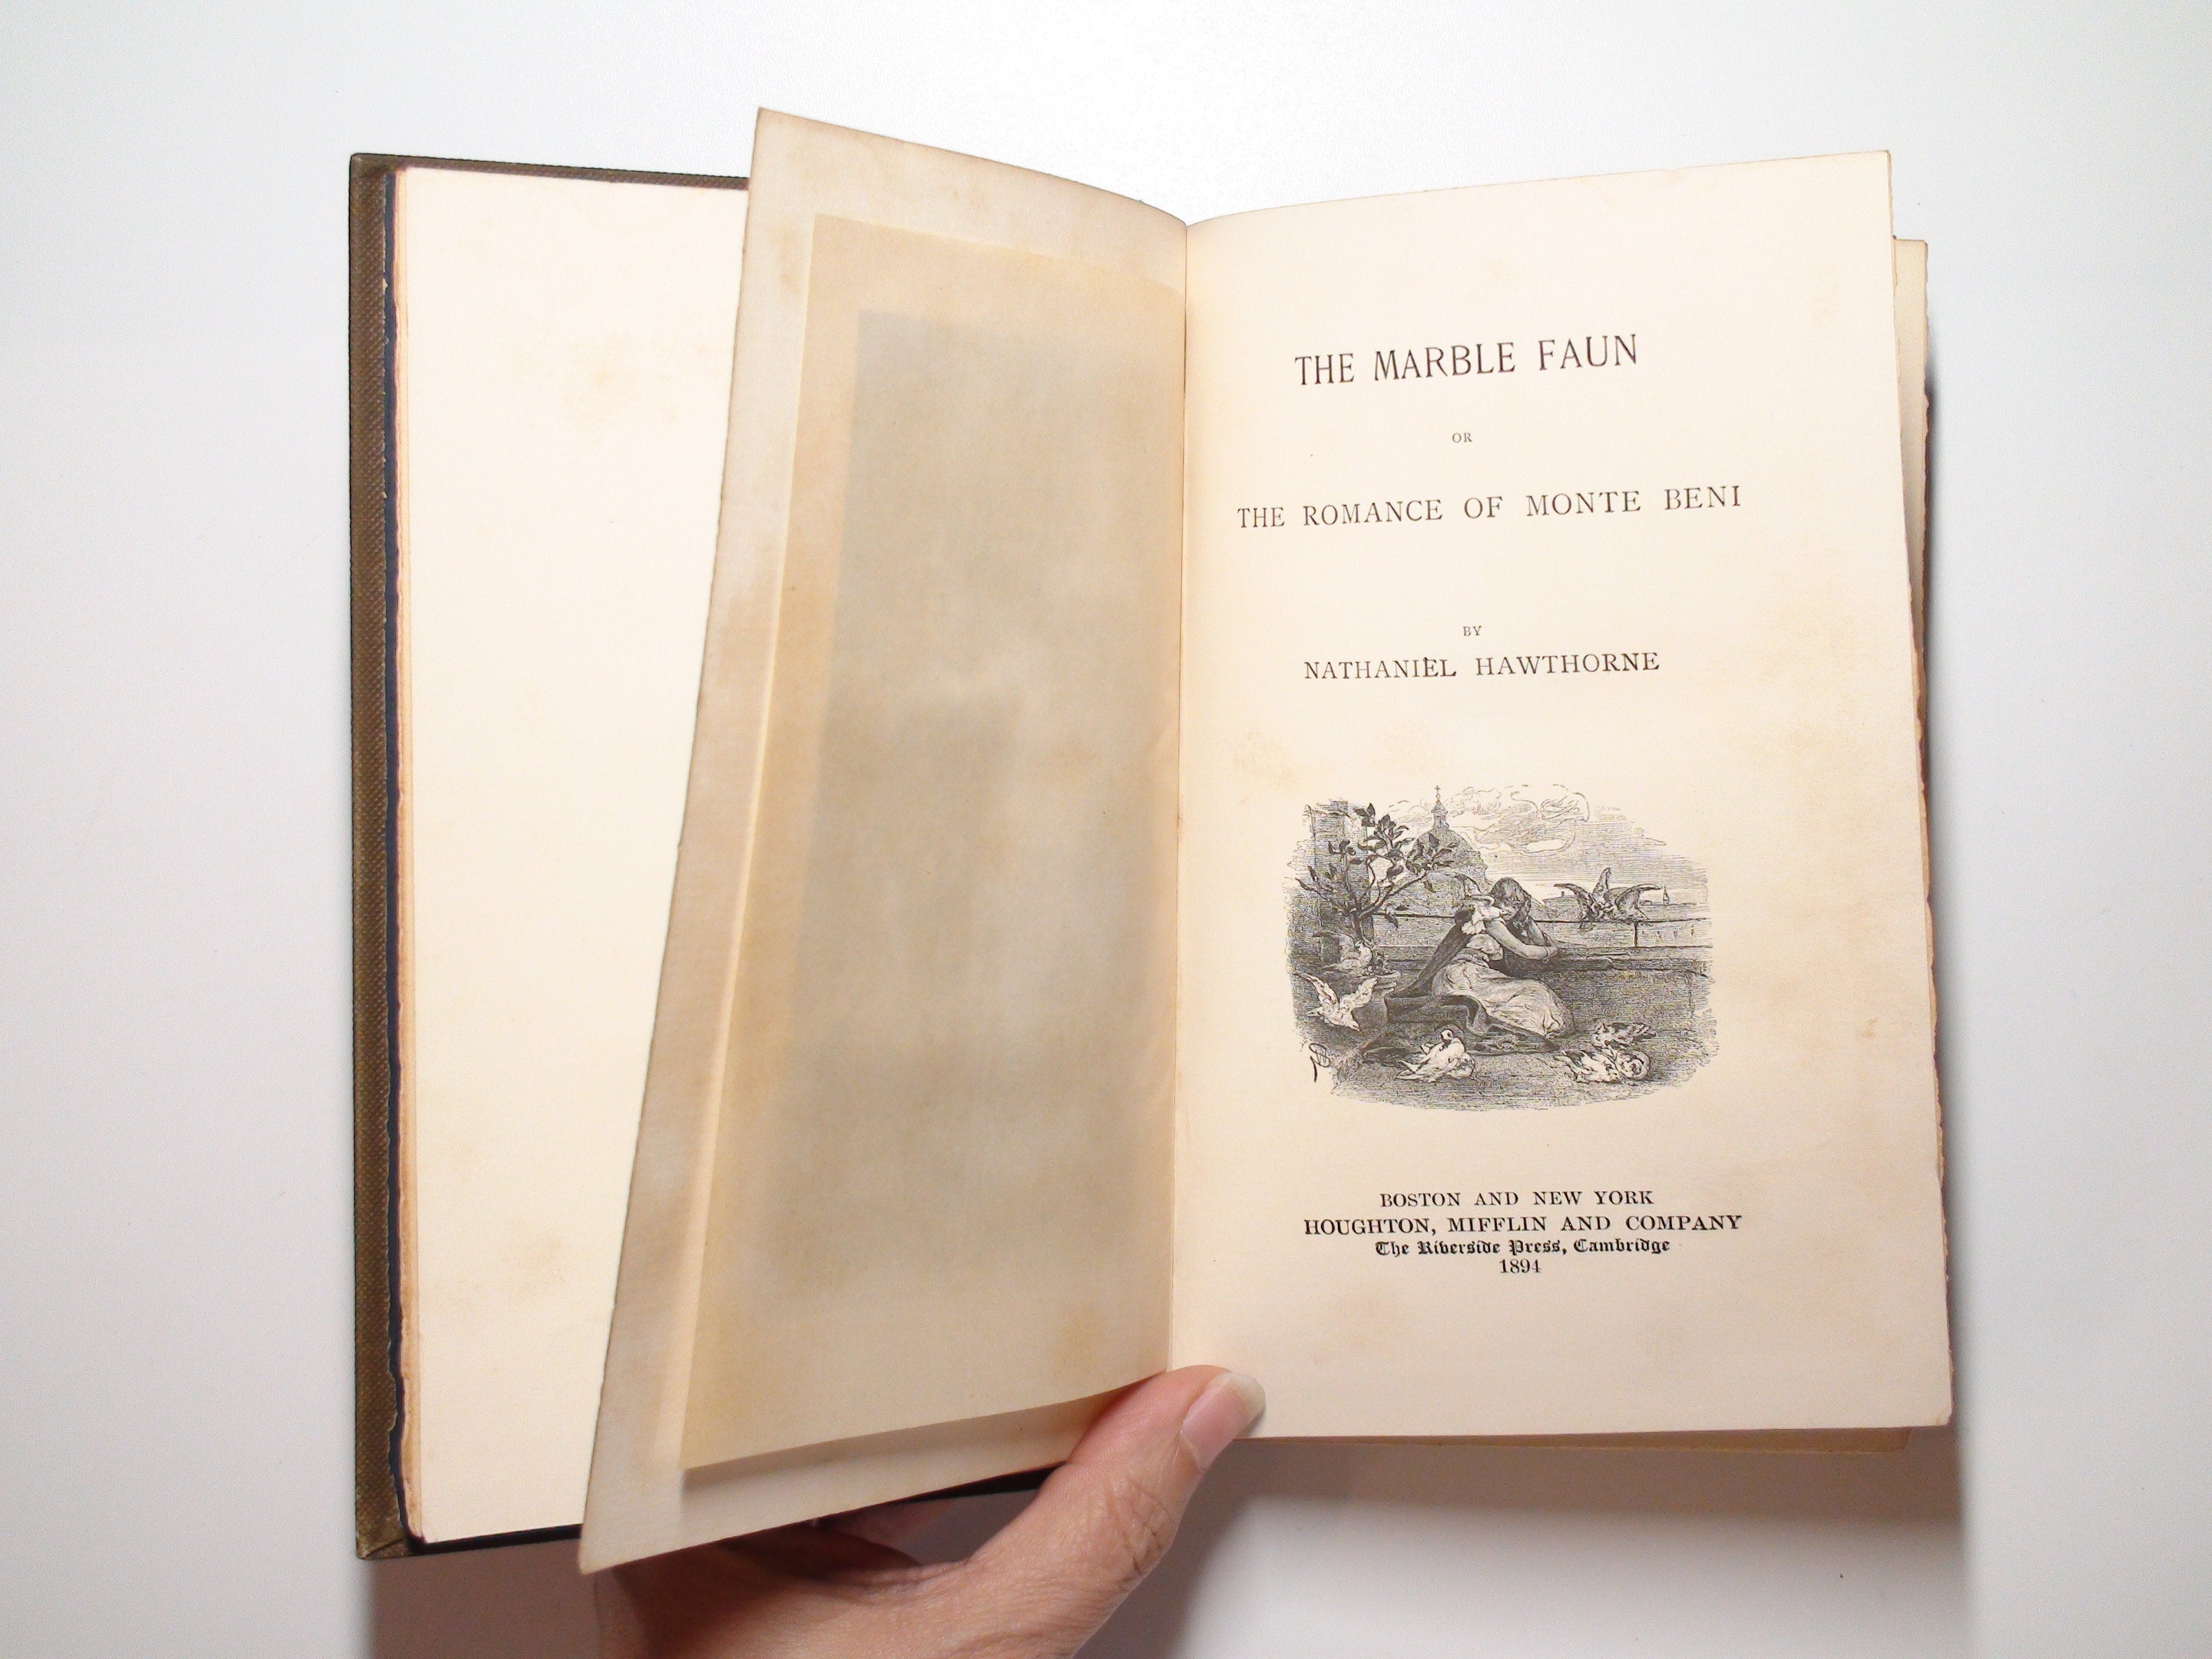 The Marble Faun, by Nathaniel Hawthorne, Riverside Edition Vol VI, 1894